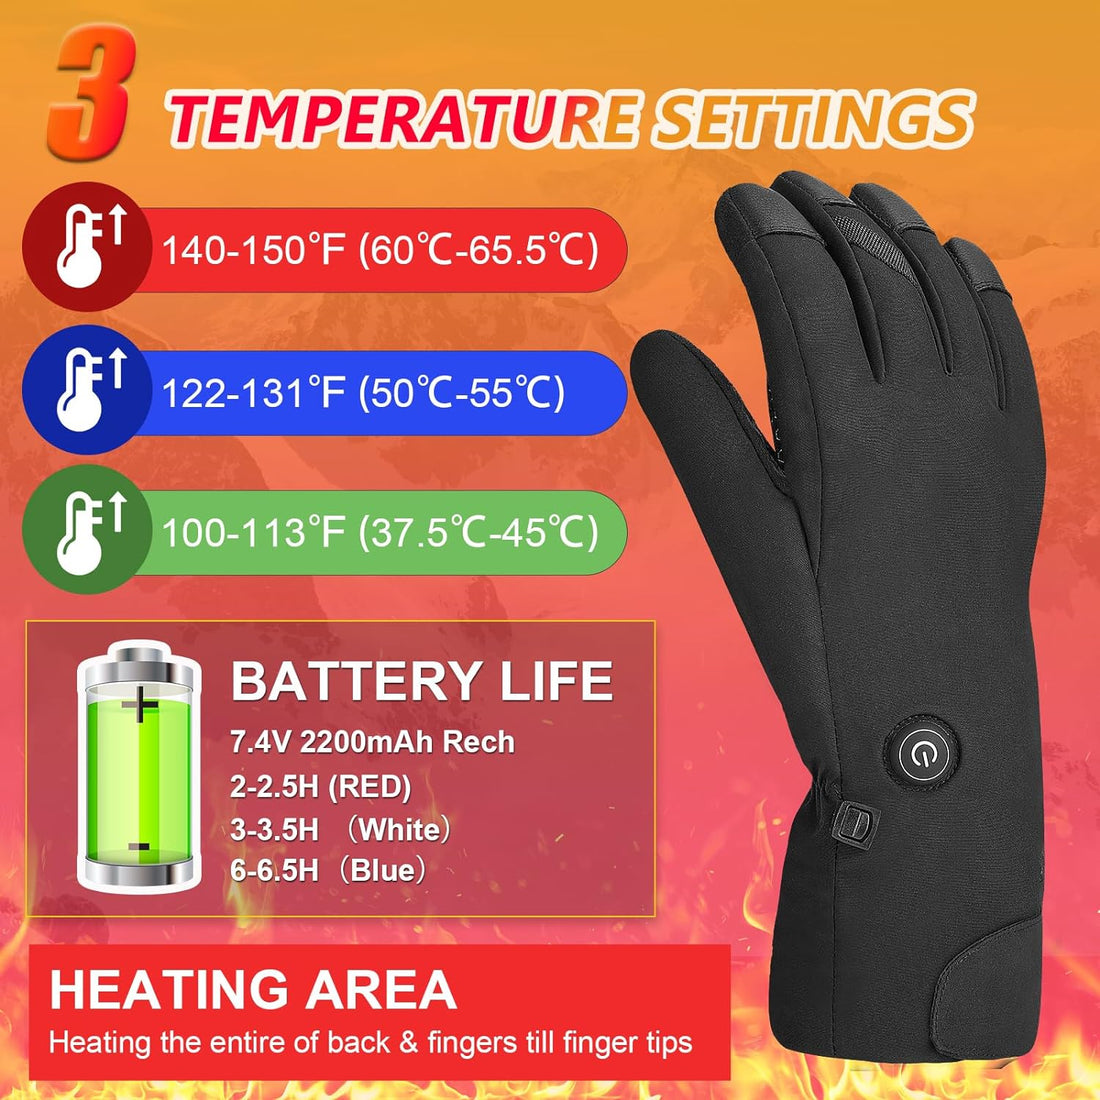 Hinsole Heated Gloves for Men and Women, Rechargeable Battery Heated Work Simple Hand Warmers Touchscreen Gloves Sports